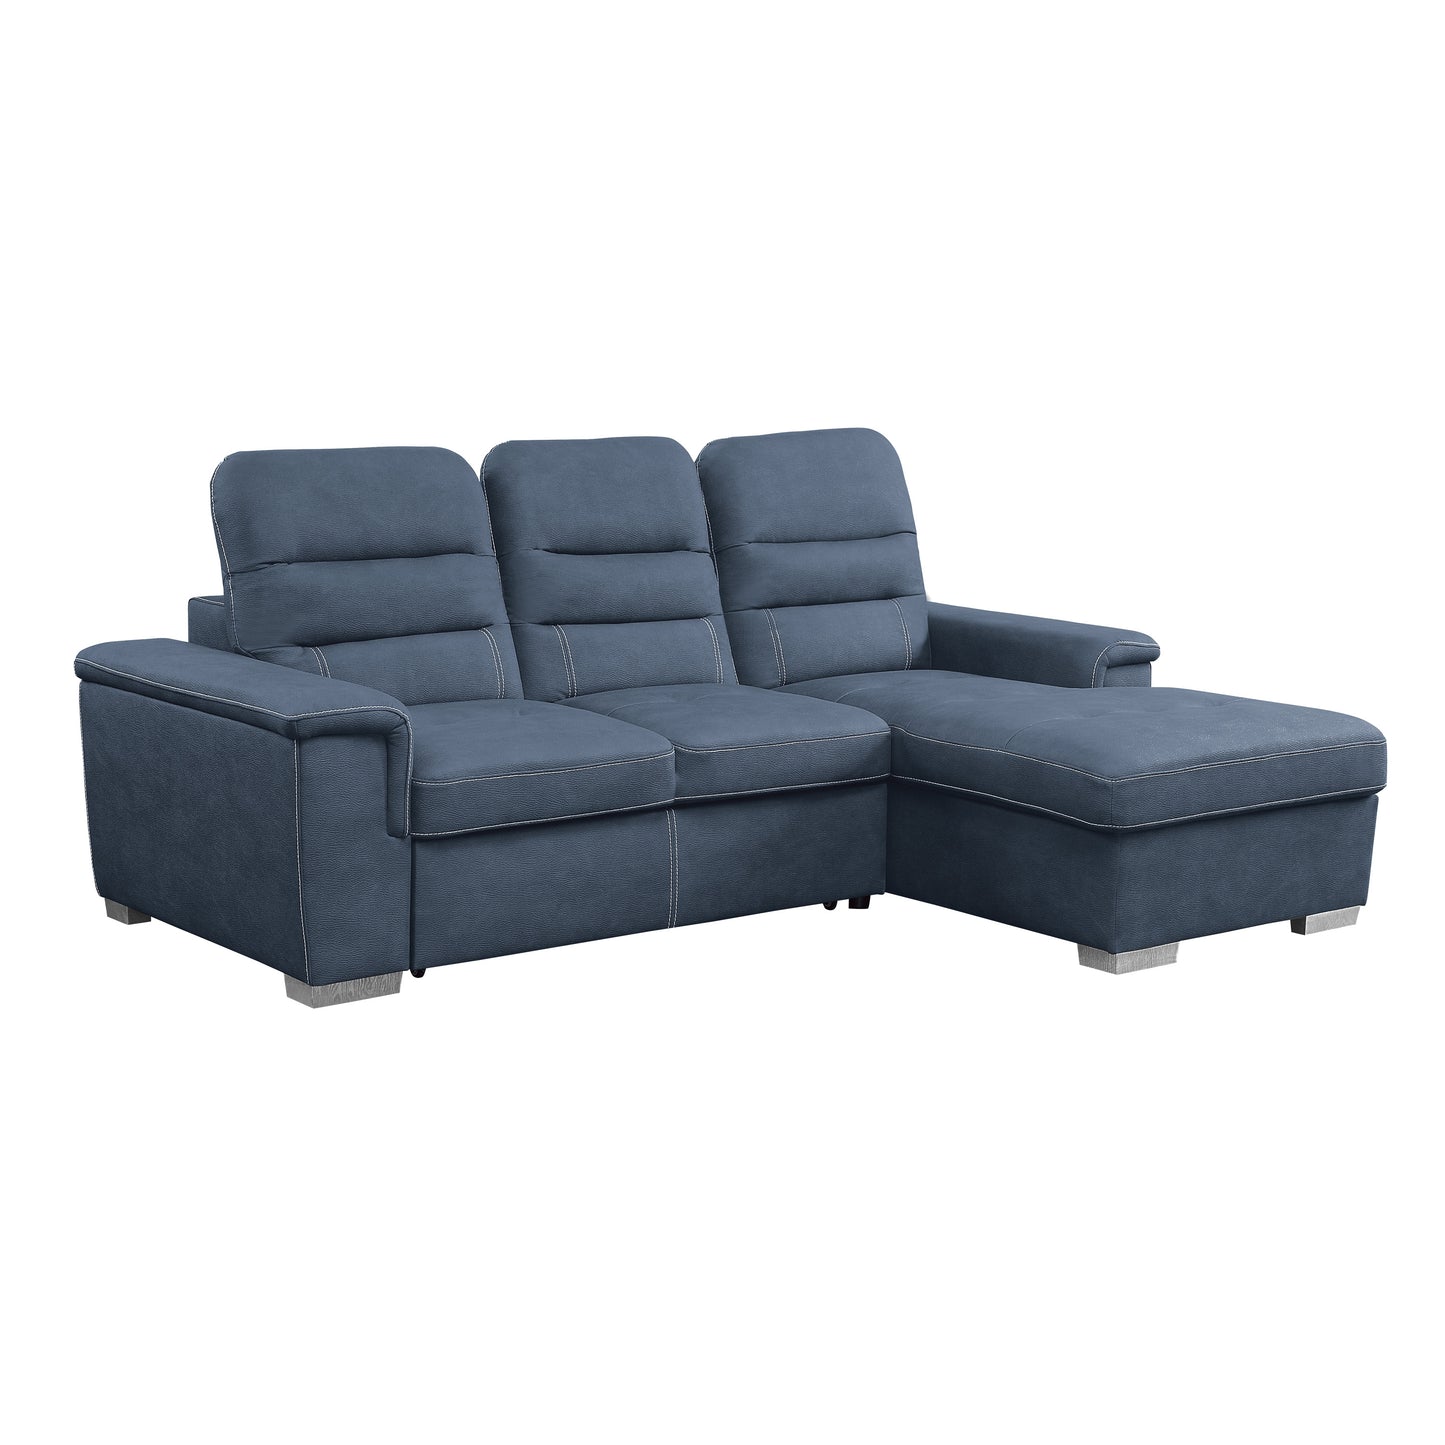 Alfio 2-Pcs Sectional w/ Adj. Headrests, Pull-out Bed & Right Chaise w/ Hidden Storage BLUE